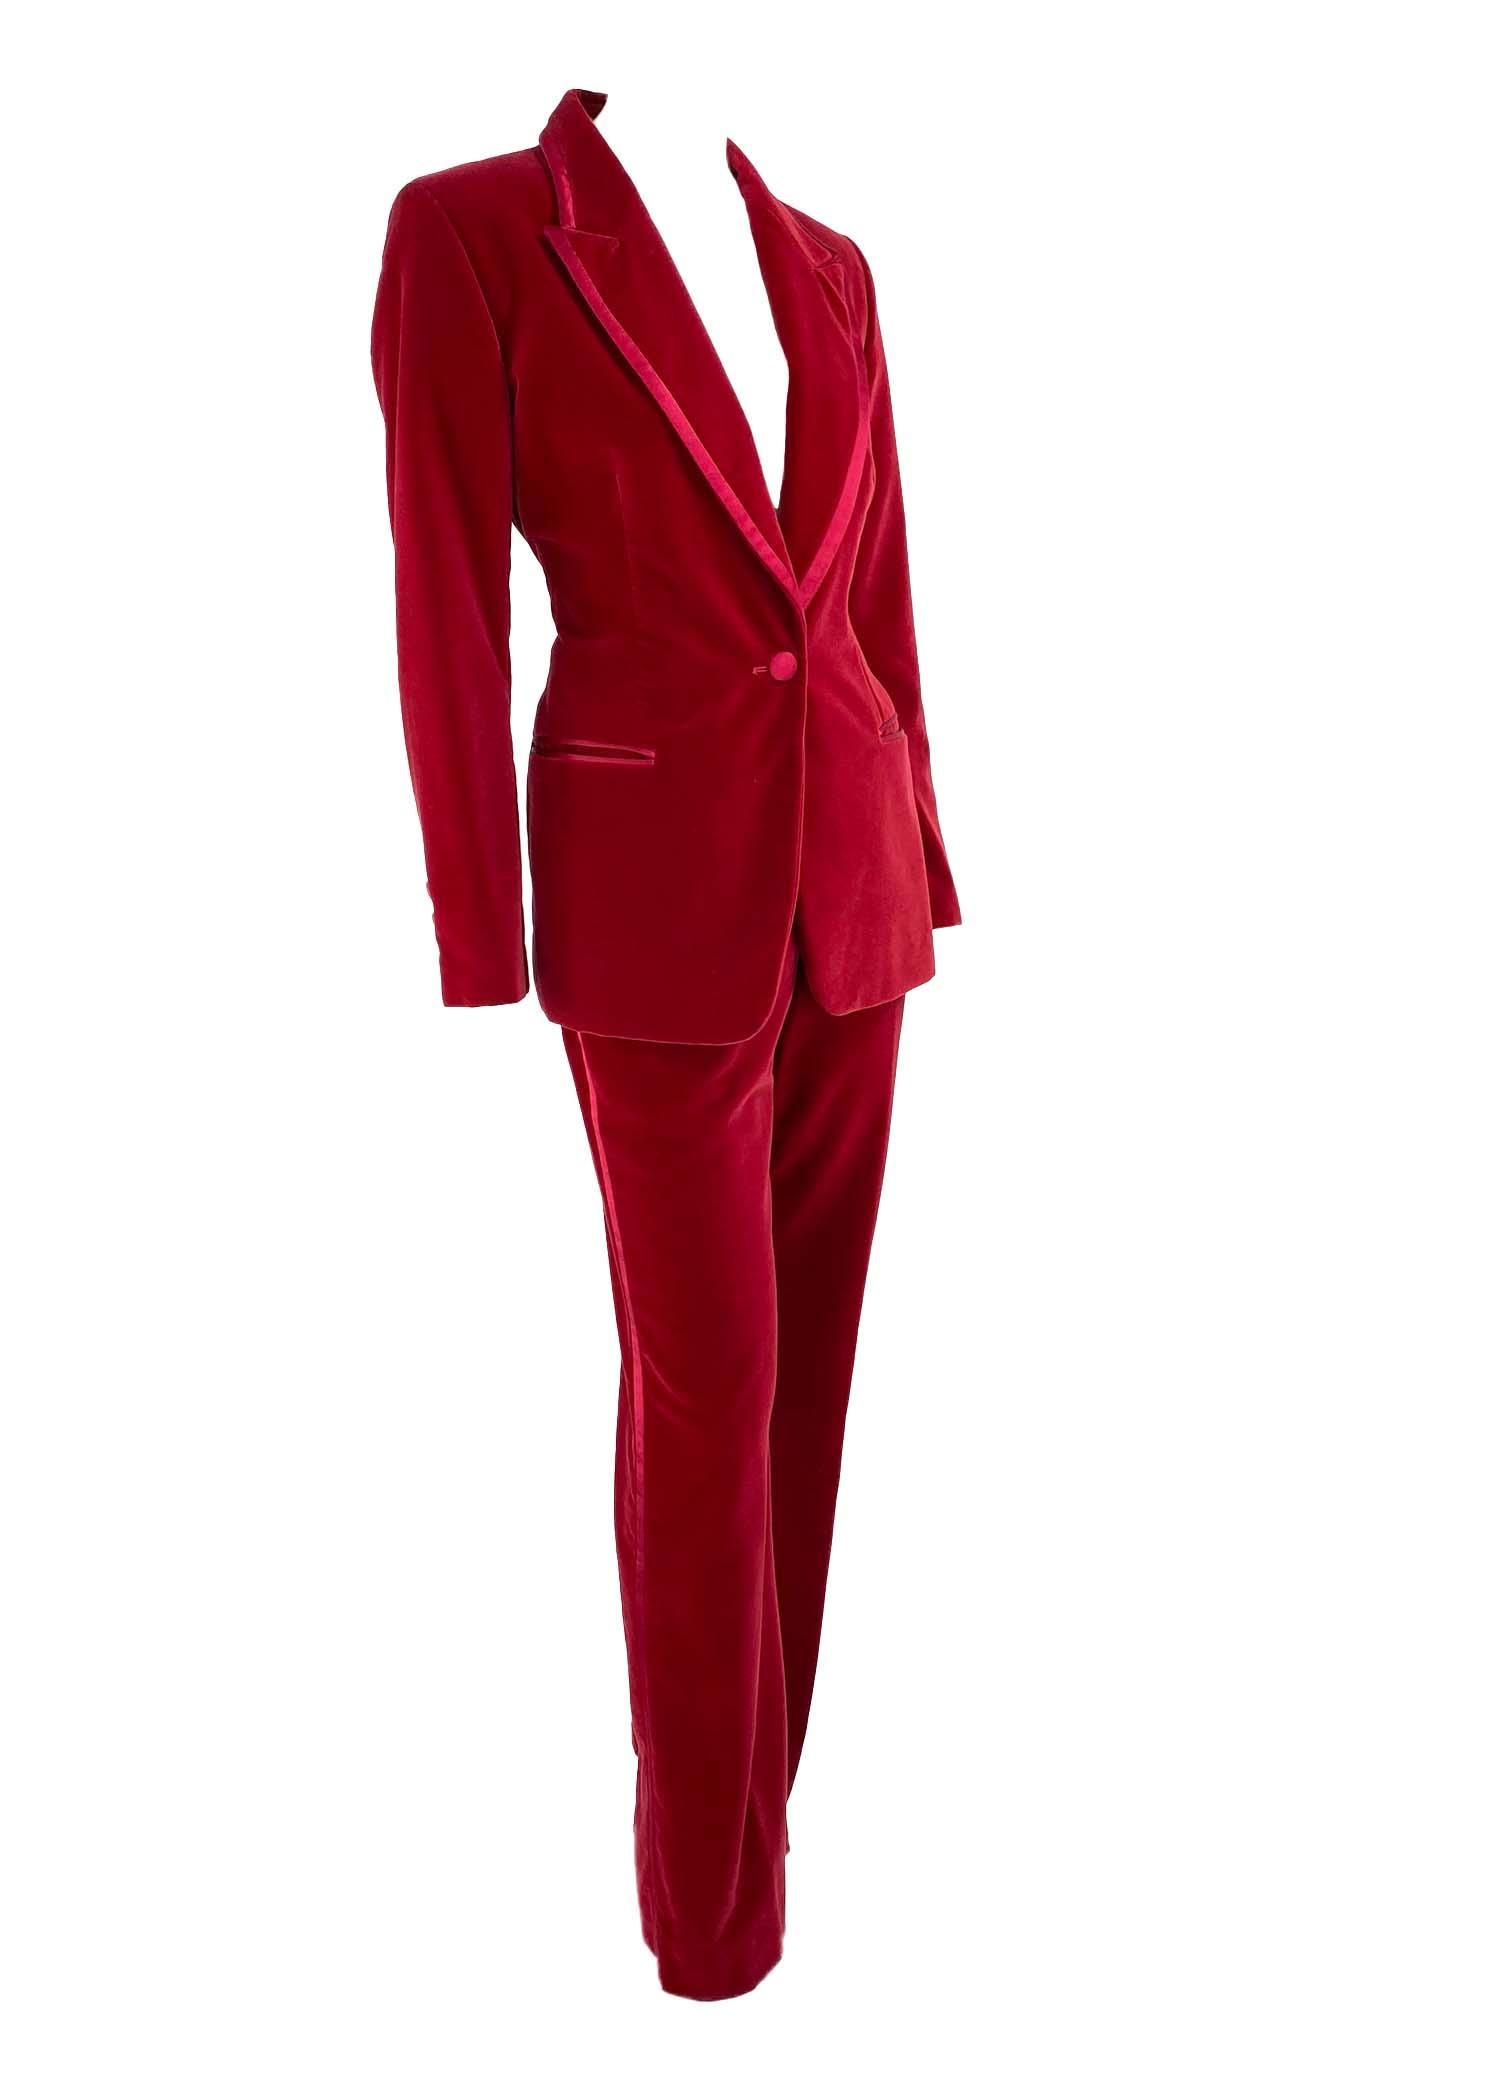 F/W 1996 Gucci by Tom Ford Red Velvet Tuxedo Documented Museum Piece 2